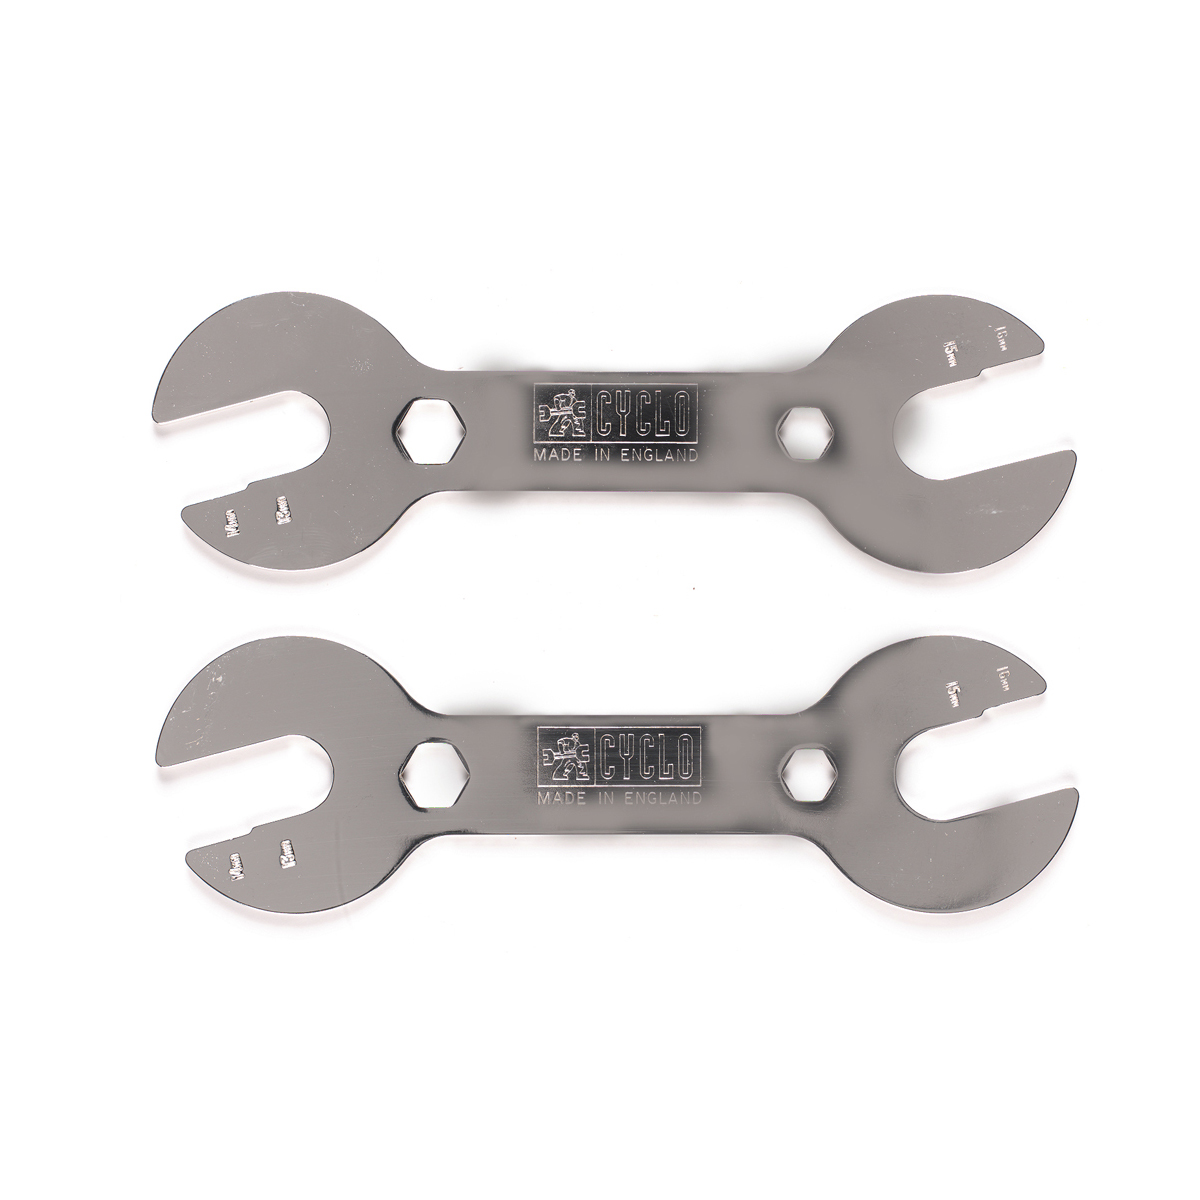 CYCLO Cone Spanners (13/14MM & 15/16mm)